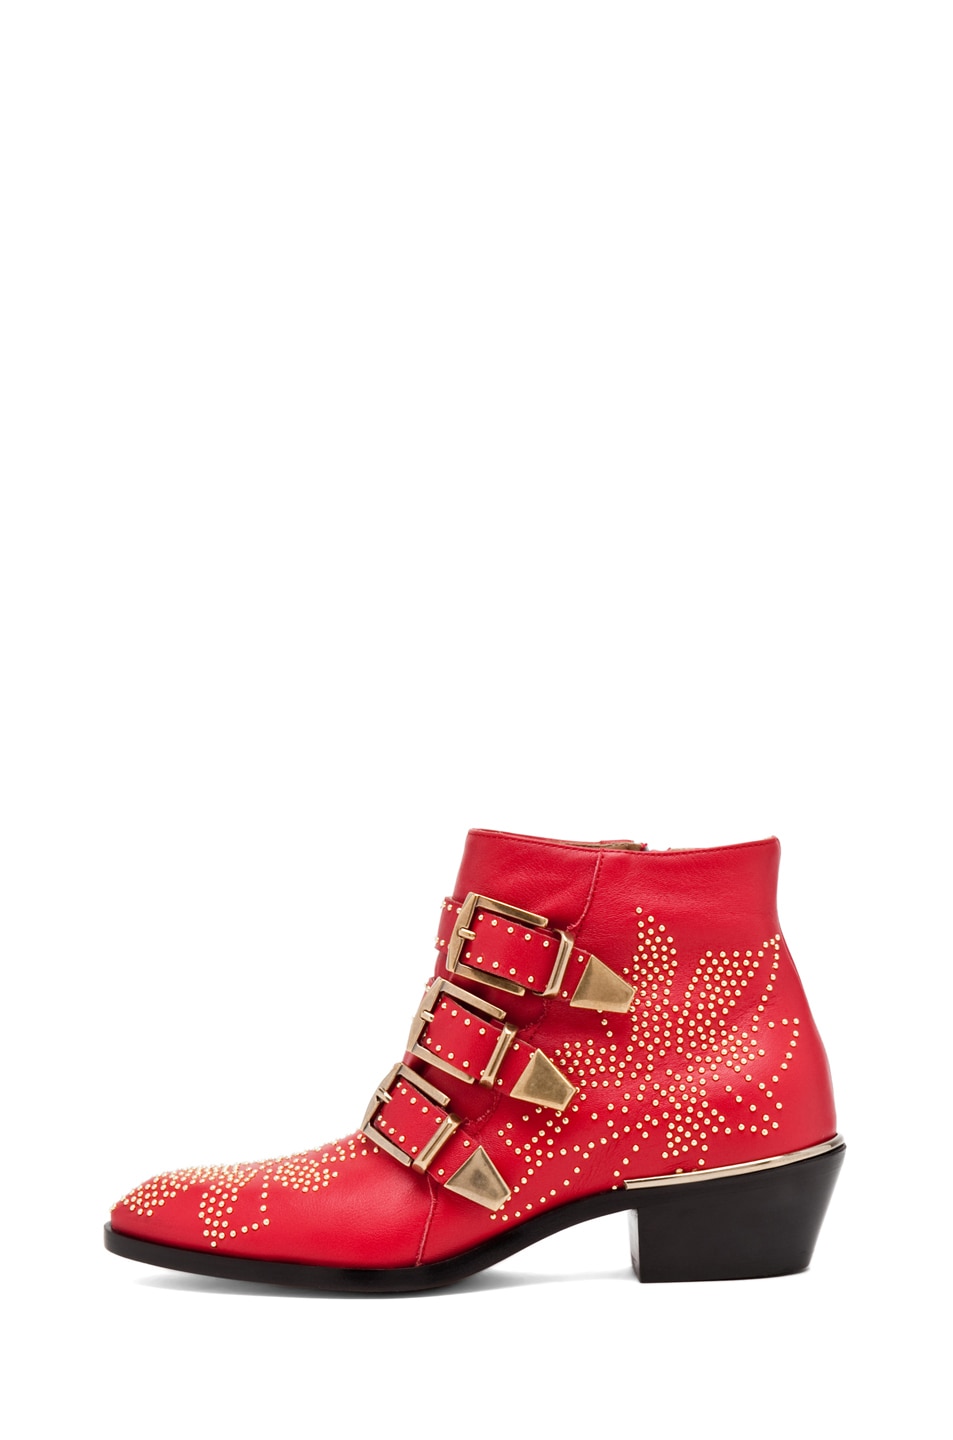 Image 1 of Chloe Susanna Leather Studded Booties in Red